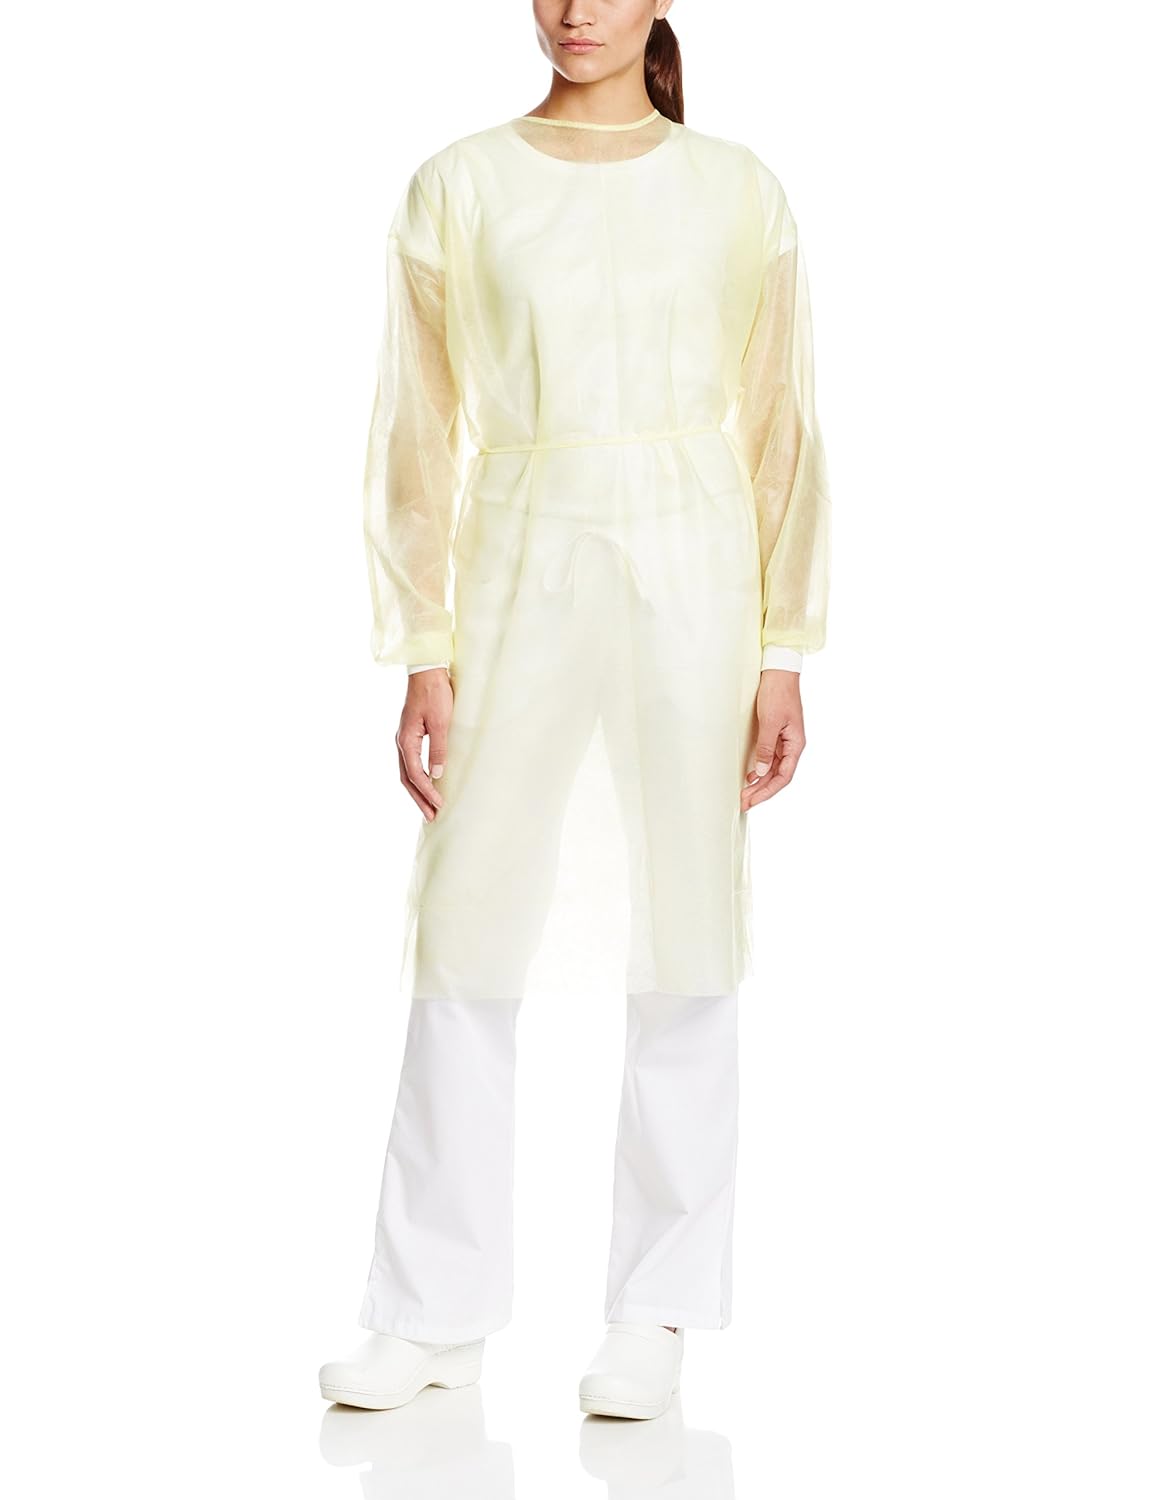 ValuMax Disposable Isolation Gown with Knit Cuff